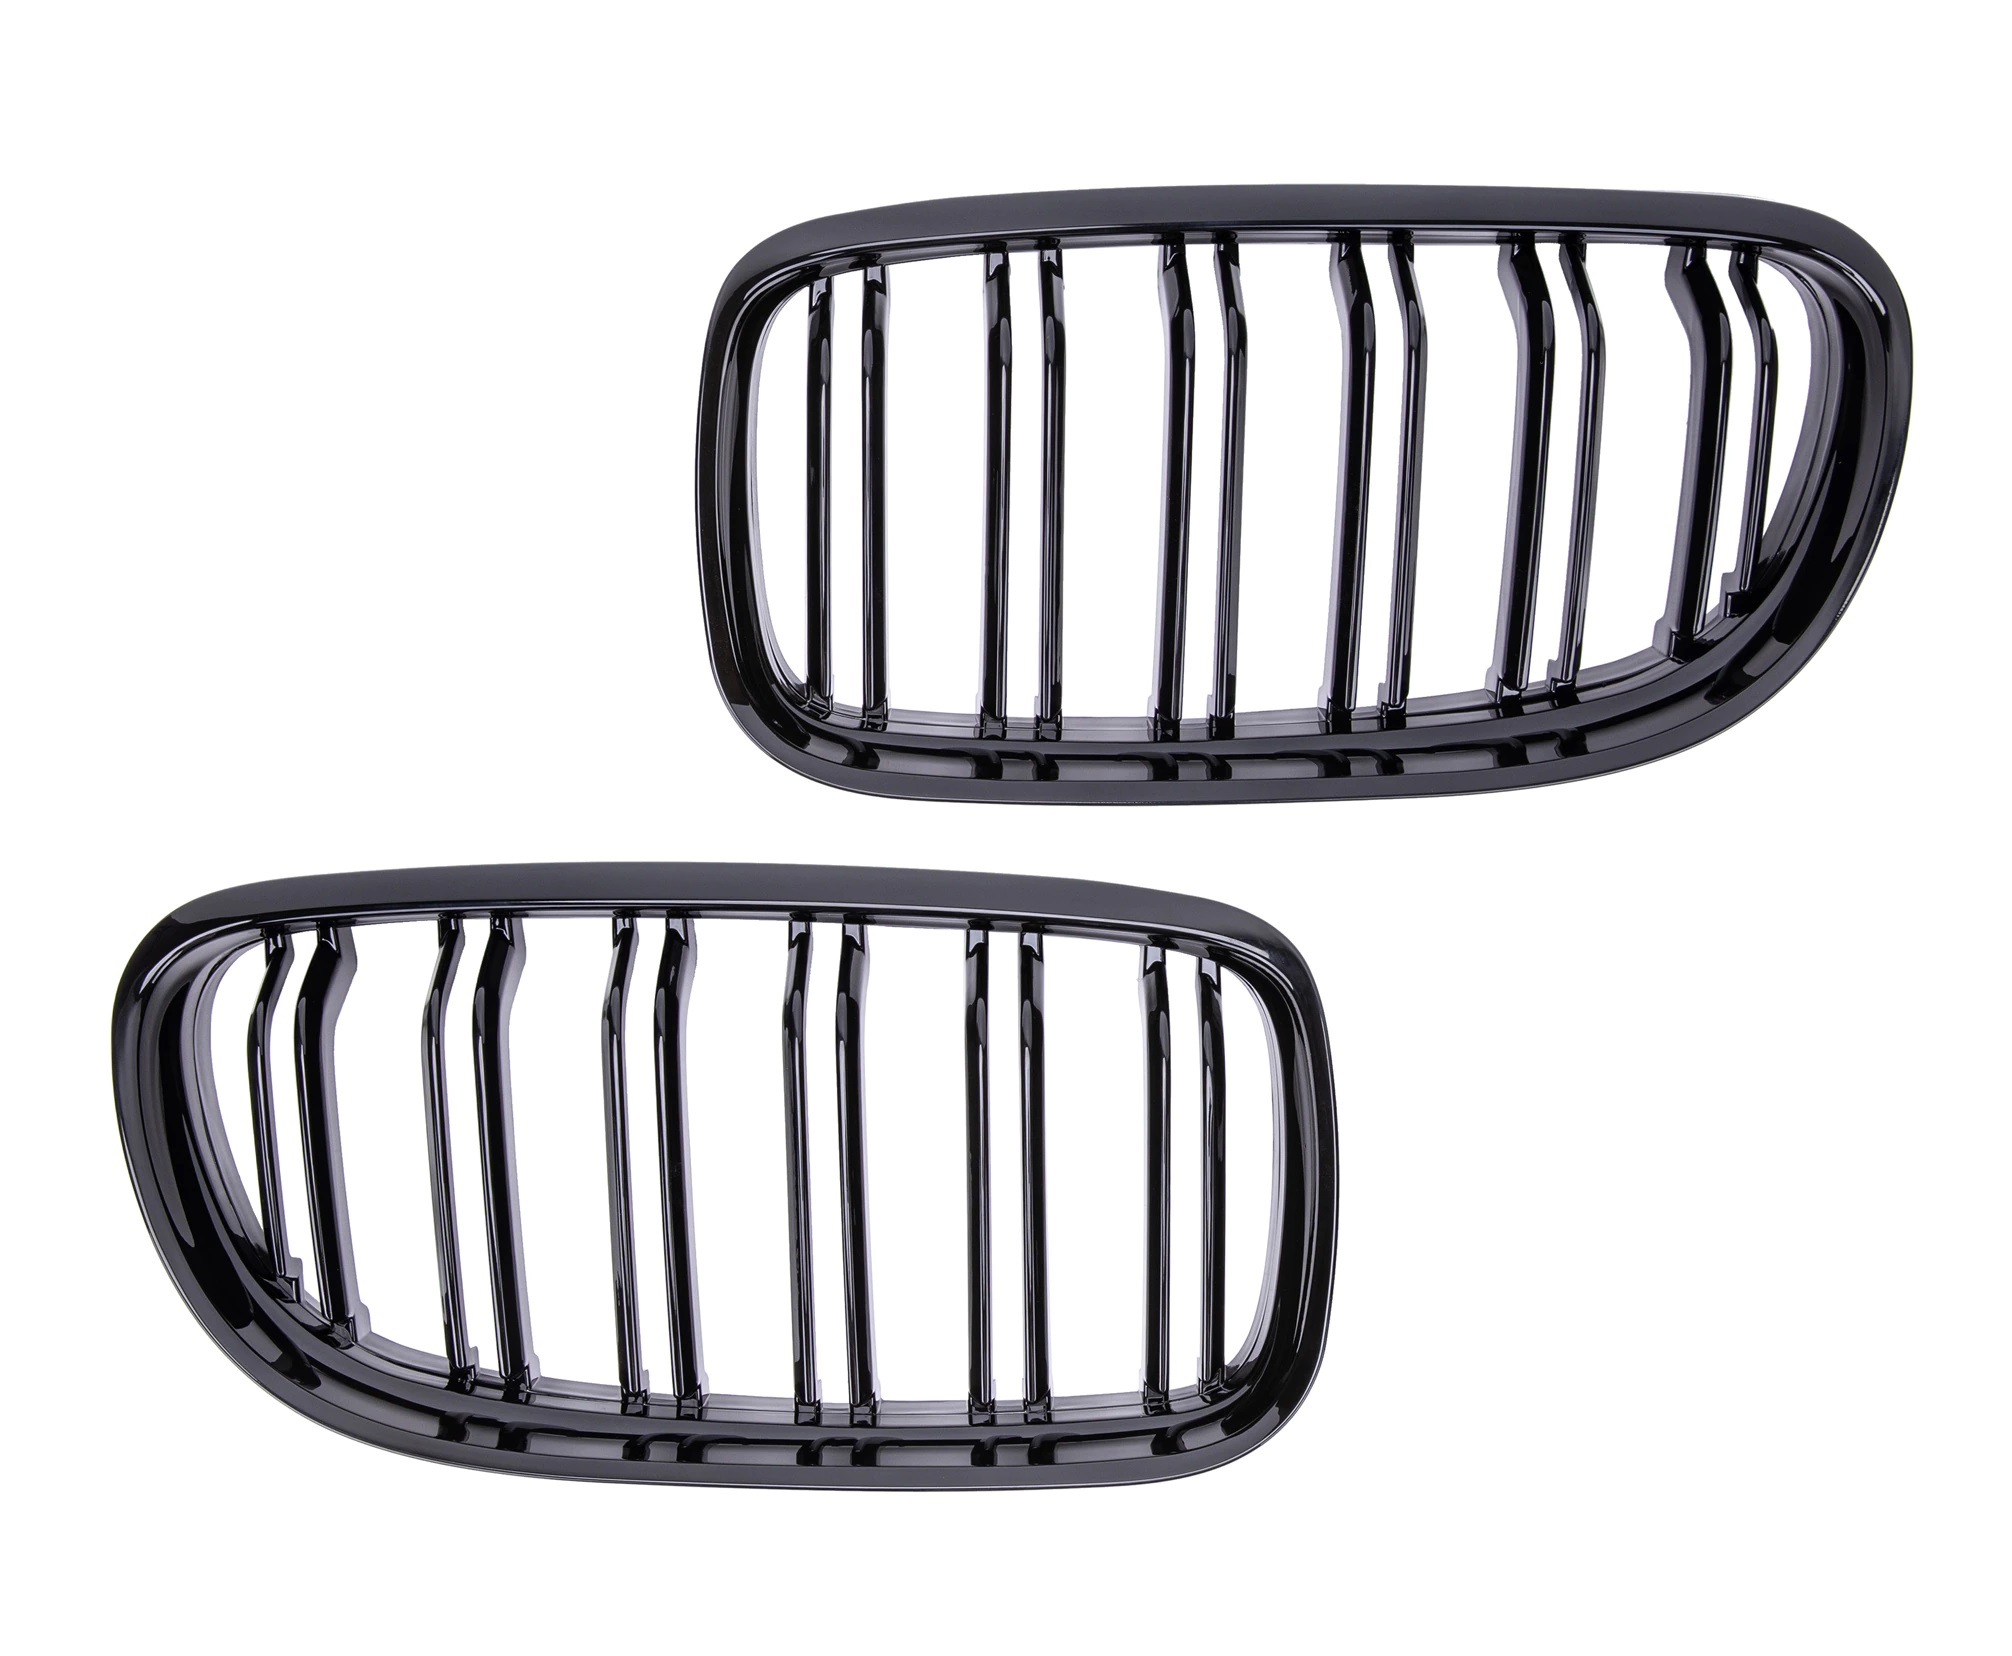 Front Grills for BMW E90 E91 Facelift 2008-2011 Sport Style Gloss Black